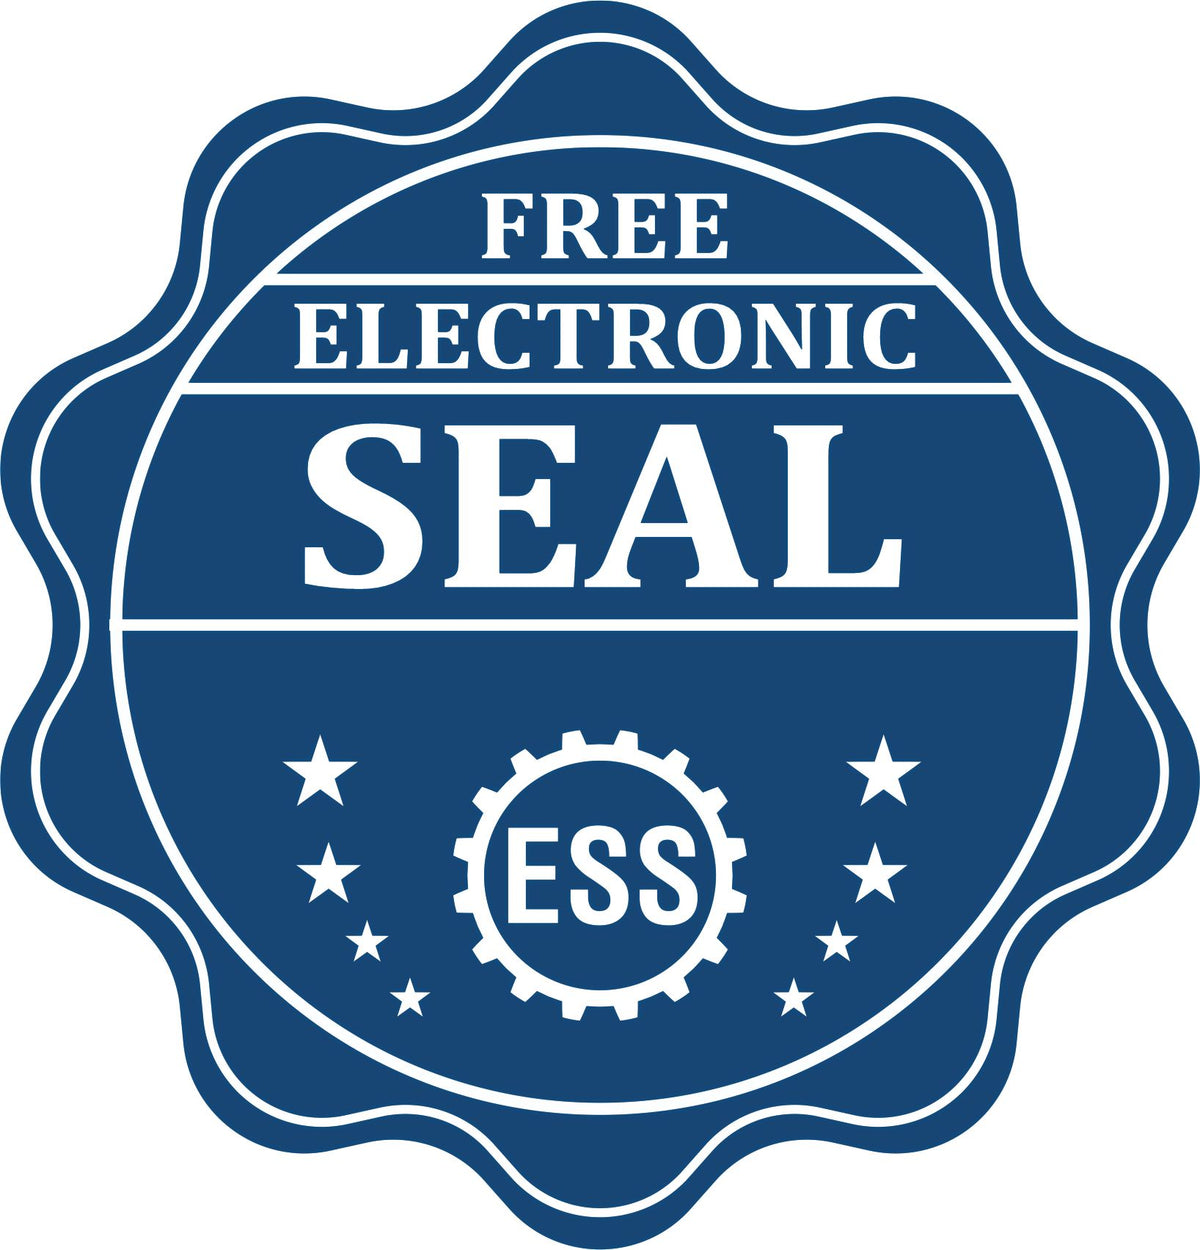 A badge showing a free electronic seal for the Slim Pre-Inked New Mexico Landscape Architect Seal Stamp with stars and the ESS gear on the emblem.